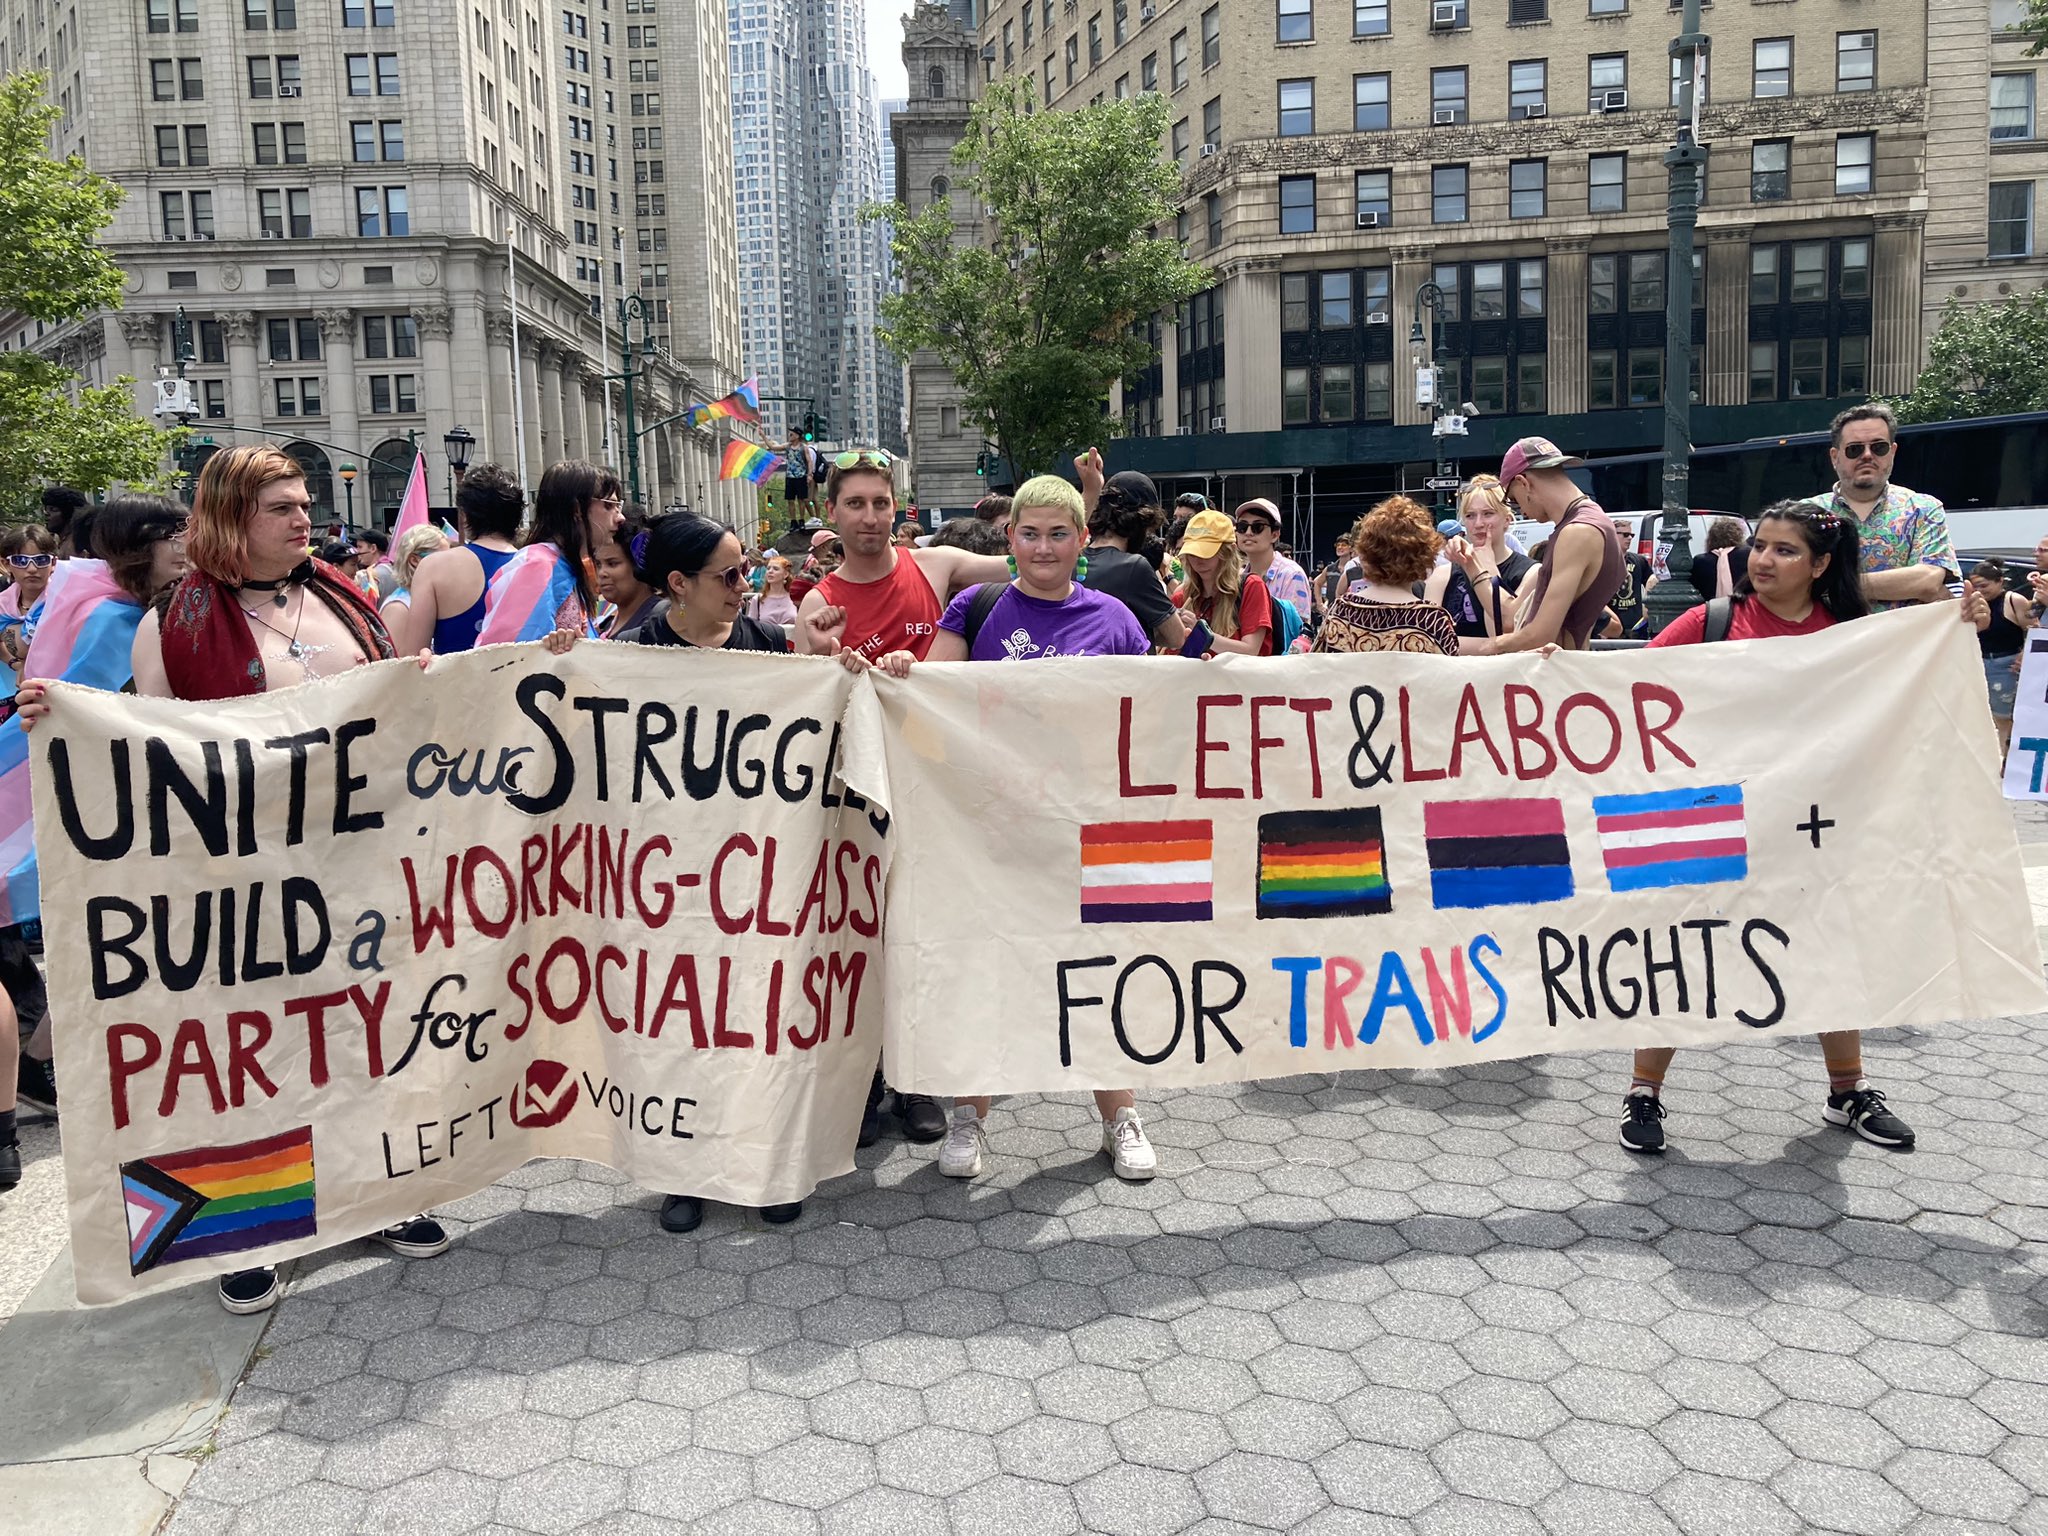 The Left and Labor Coalition at the NYC Queer Liberation March on June 24, 2023. The banners read "Unite our struggles, build a working-class party for socialism" and "left & labor for trans rights."